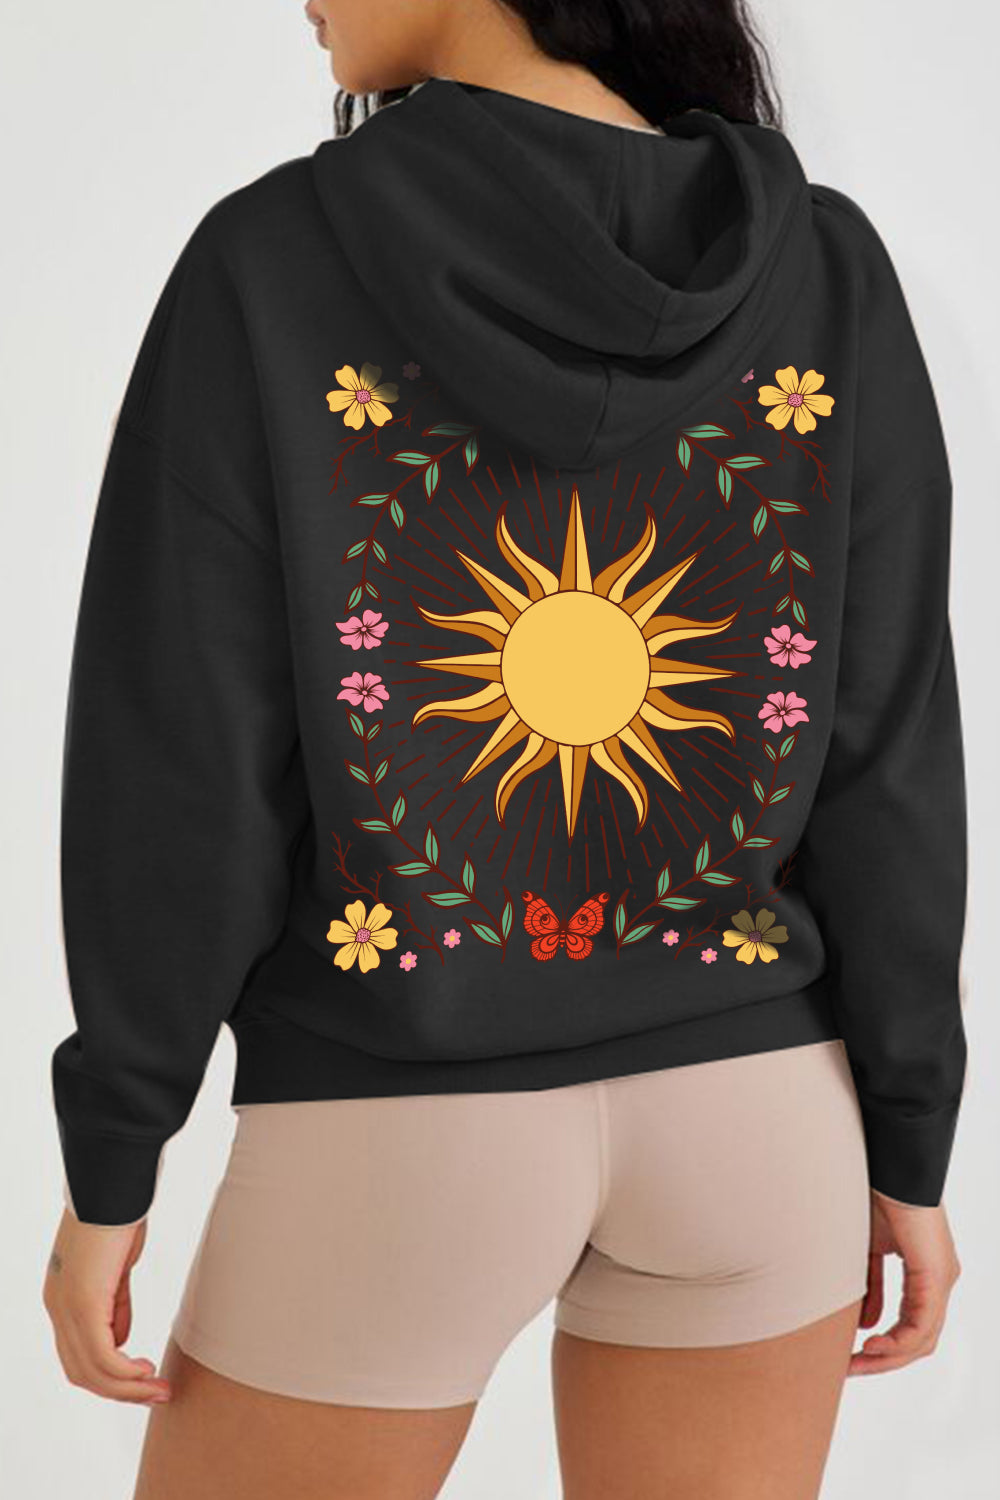 Simply Love Full Size Sun Graphic Hooded Jacket